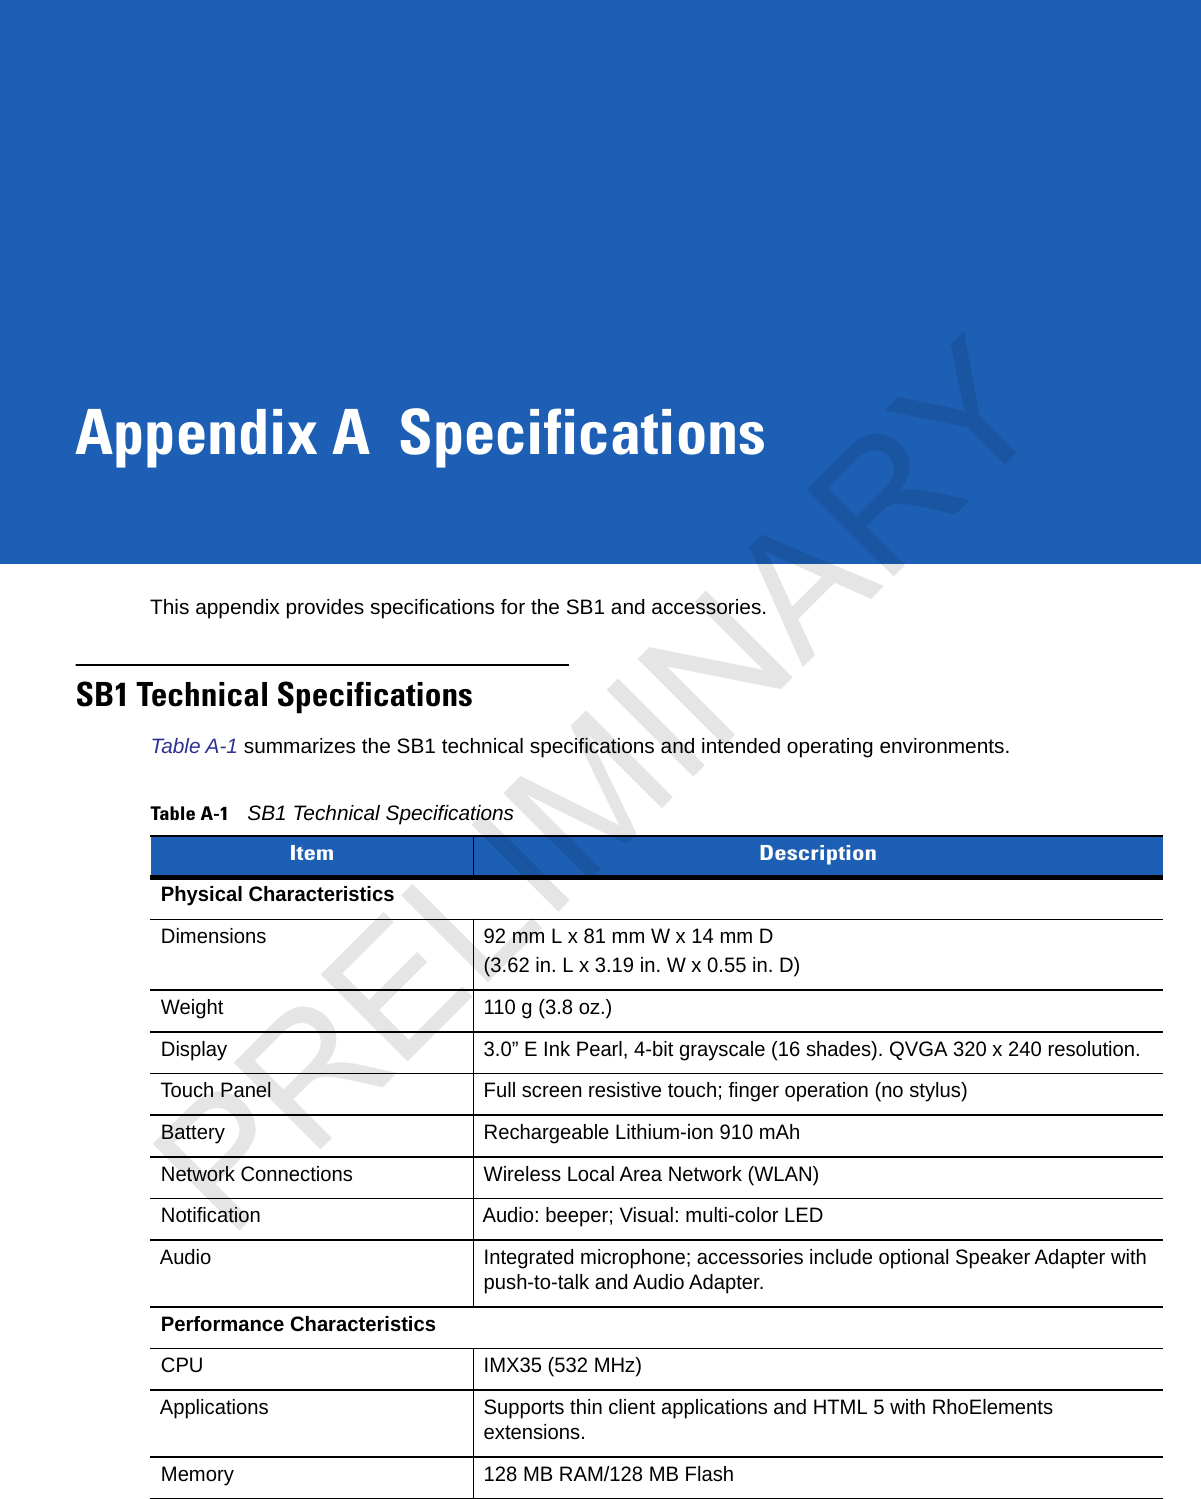 Appendix A SpecificationsThis appendix provides specifications for the SB1 and accessories.SB1 Technical SpecificationsTable A-1 summarizes the SB1 technical specifications and intended operating environments.Table A-1SB1 Technical Specifications Item DescriptionPhysical CharacteristicsDimensions 92 mm L x 81 mm W x 14 mm D(3.62 in. L x 3.19 in. W x 0.55 in. D)Weight 110 g (3.8 oz.)Display 3.0” E Ink Pearl, 4-bit grayscale (16 shades). QVGA 320 x 240 resolution.Touch Panel Full screen resistive touch; finger operation (no stylus)Battery Rechargeable Lithium-ion 910 mAhNetwork Connections Wireless Local Area Network (WLAN)Notification Audio: beeper; Visual: multi-color LEDAudio Integrated microphone; accessories include optional Speaker Adapter with push-to-talk and Audio Adapter.Performance CharacteristicsCPU IMX35 (532 MHz)Applications Supports thin client applications and HTML 5 with RhoElements extensions.Memory 128 MB RAM/128 MB FlashPRELIMINARY